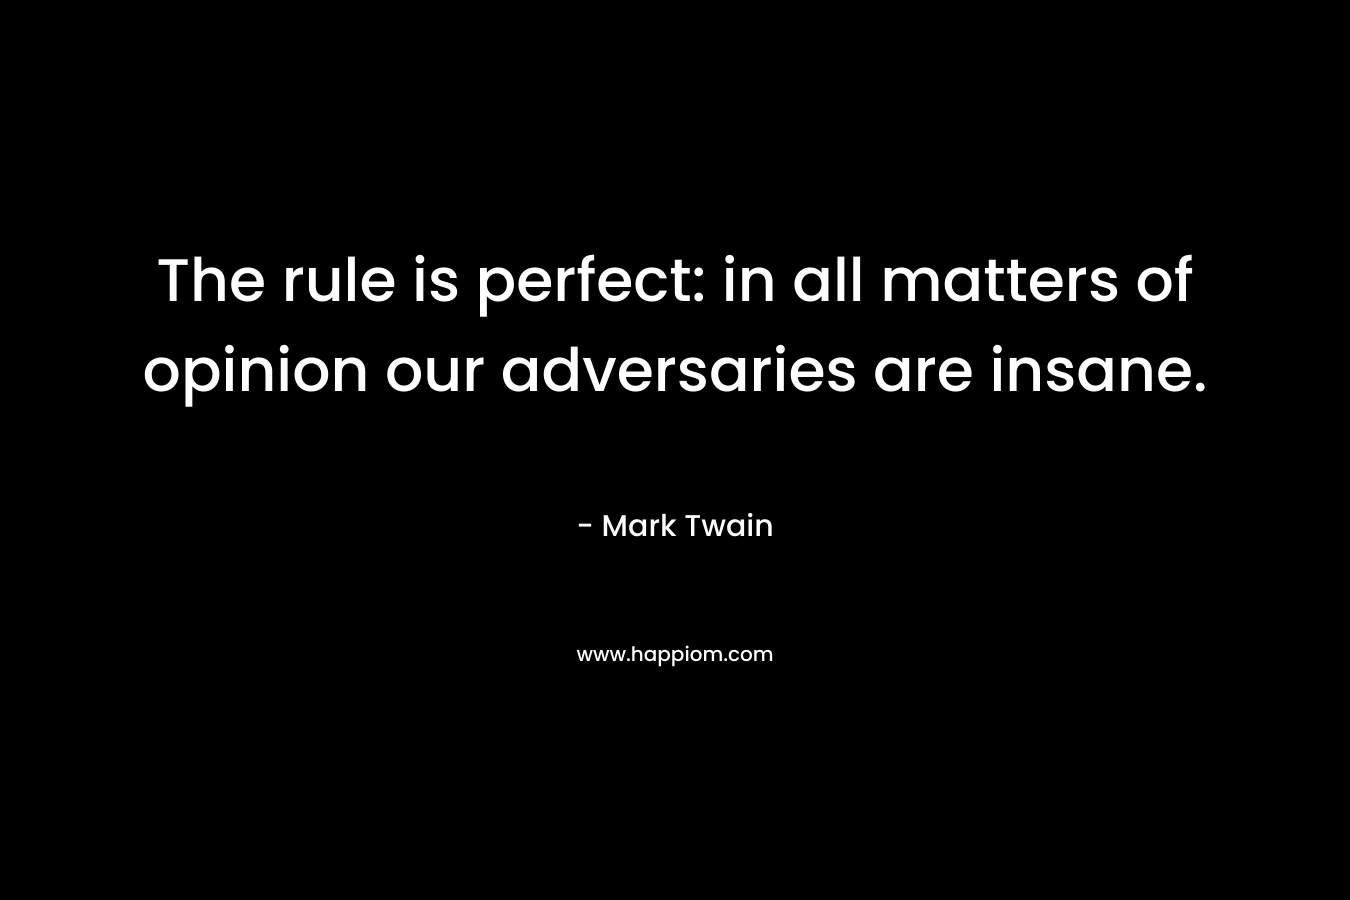 The rule is perfect: in all matters of opinion our adversaries are insane. – Mark Twain